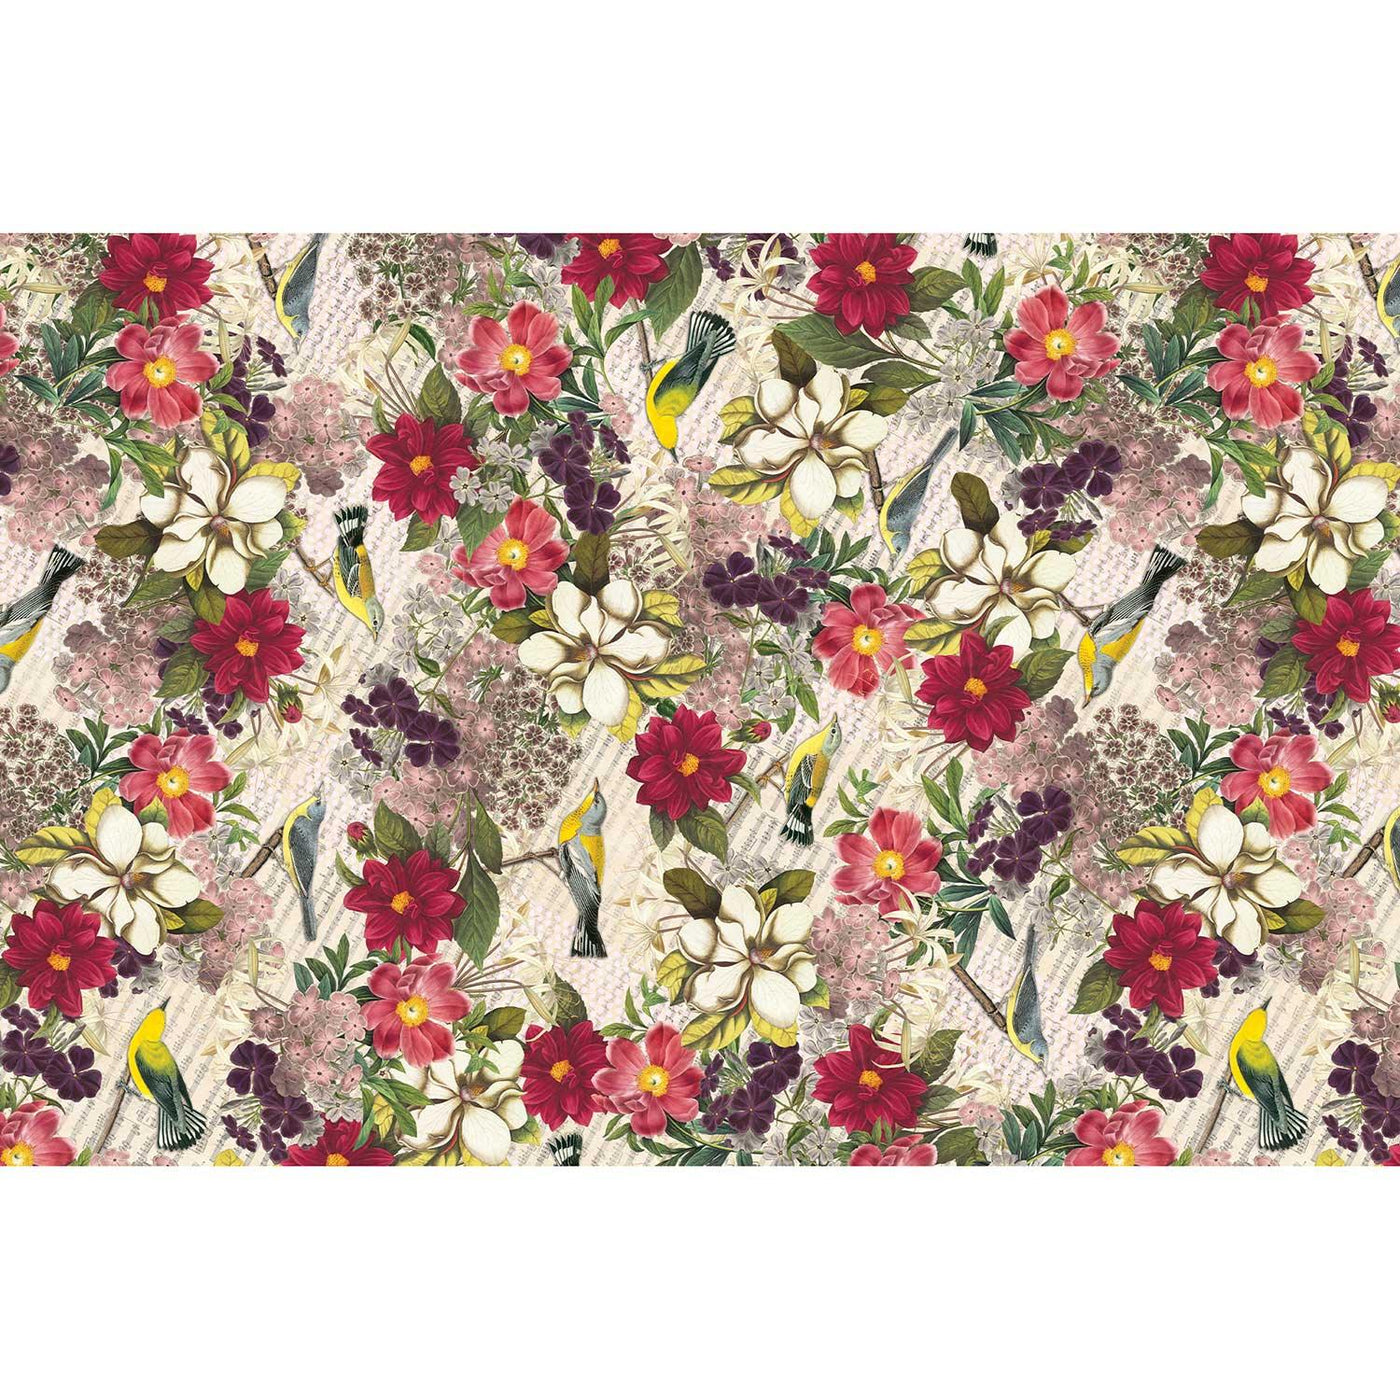 Botanic 20" x 30" Floral Gift Tissue Paper by Present Paper - Vysn